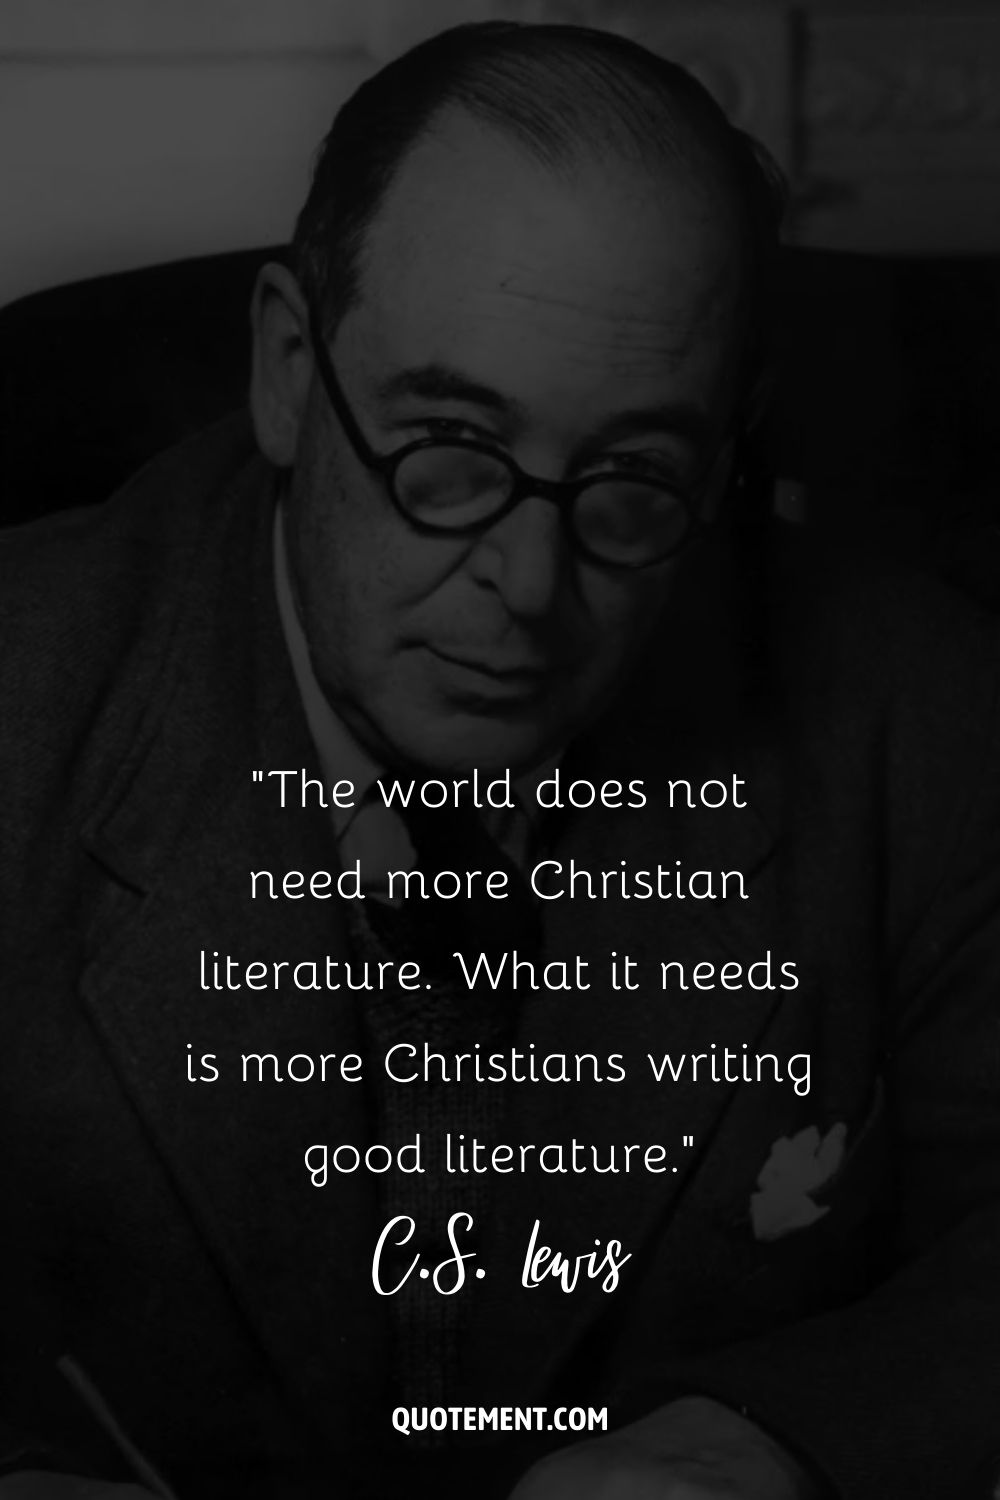 seated with serene focus, C.S. Lewis holds a pen and wears glasses